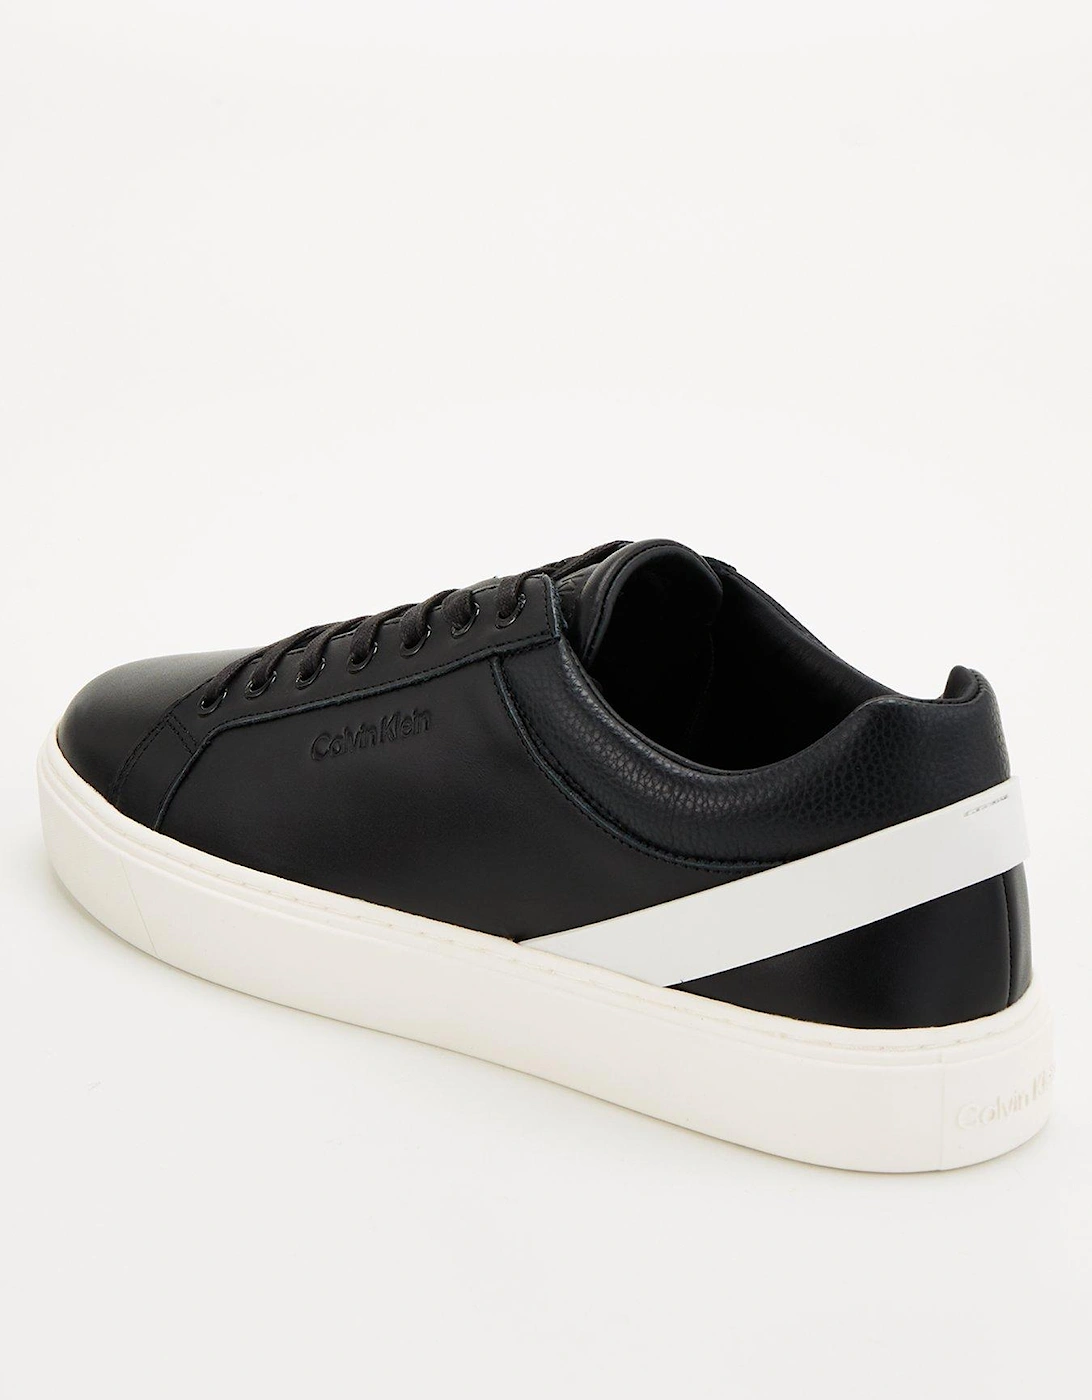 Low Top Lace Up Archive Stripe Trainer - Black/white